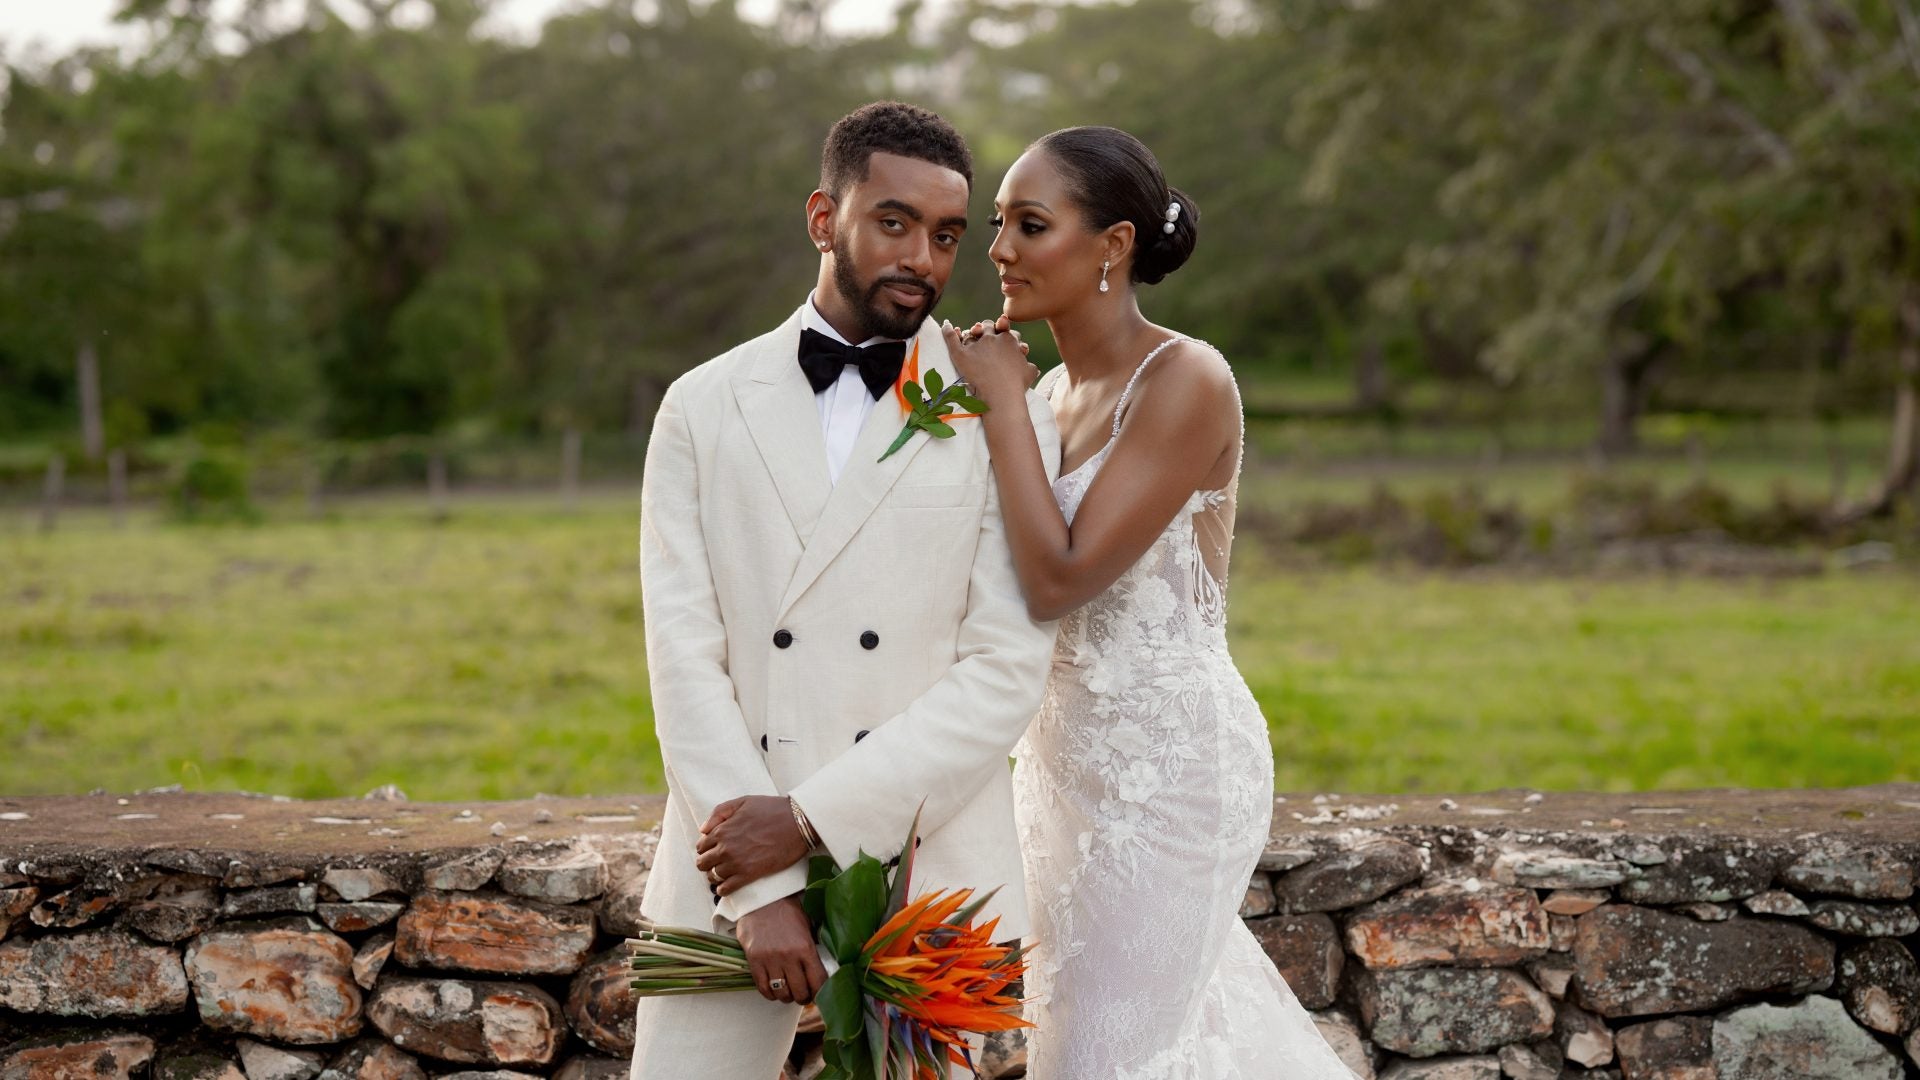 Exclusive: Inside Sheryl Lee Ralph's Son Etienne Maurice And Stephanie Wash's Star-Studded Wedding In Jamaica